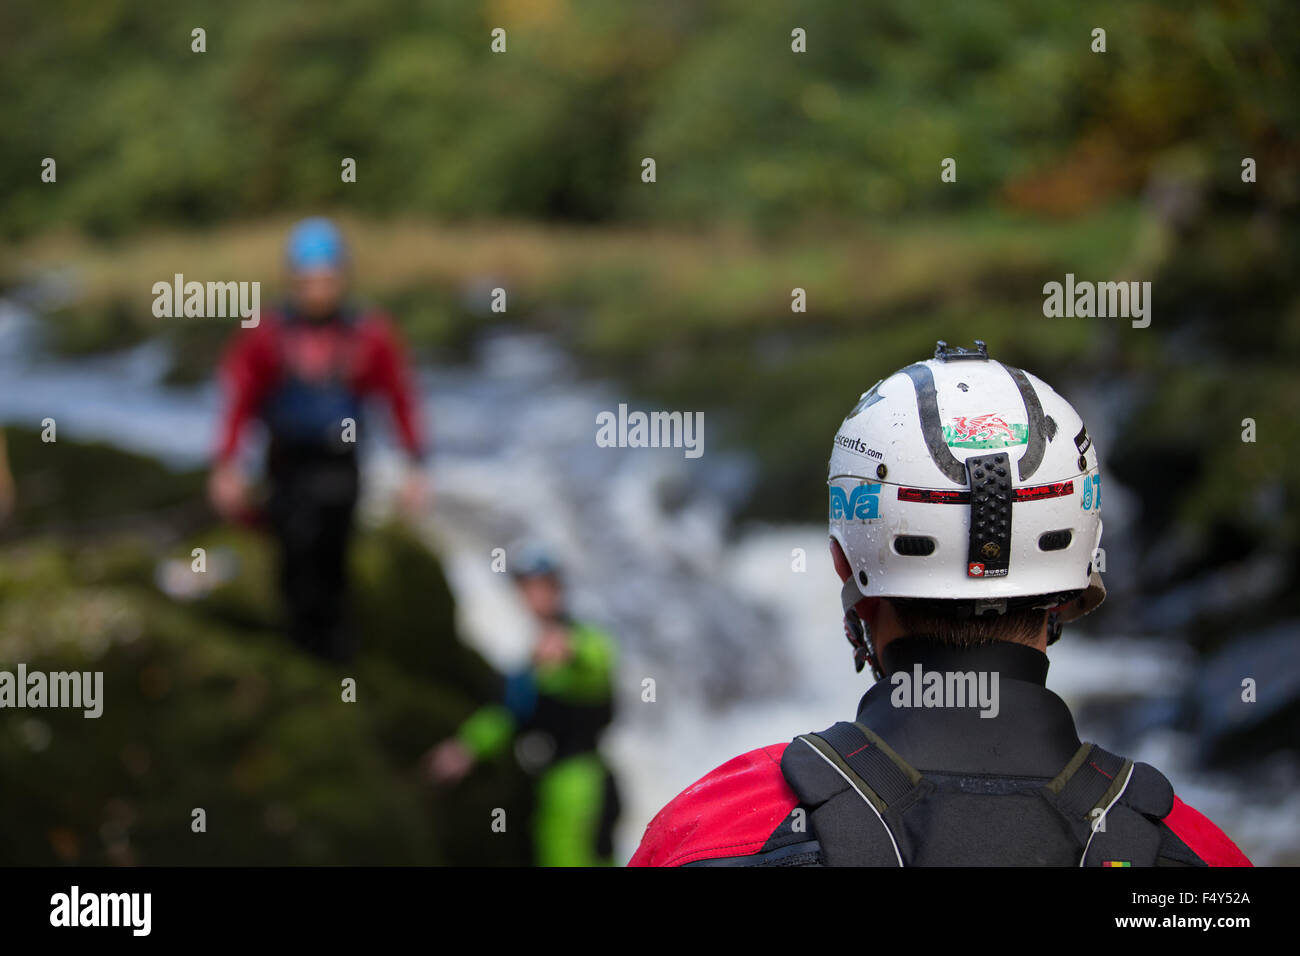 Henllan, Ceredigion, Wales, UK. 24th Oct, 2015. The annual Teifi Tour takes place this weekend. Kayakers, mainly from College and University kayaking clubs take to the River Teifi, from Llandysul to Poppit Sands, to enjoy a weekend of high adrenaline adventure. Pictured are kayakers negotiating the falls at Henllan Bridge. Credit:  atgof.co/Alamy Live News Stock Photo